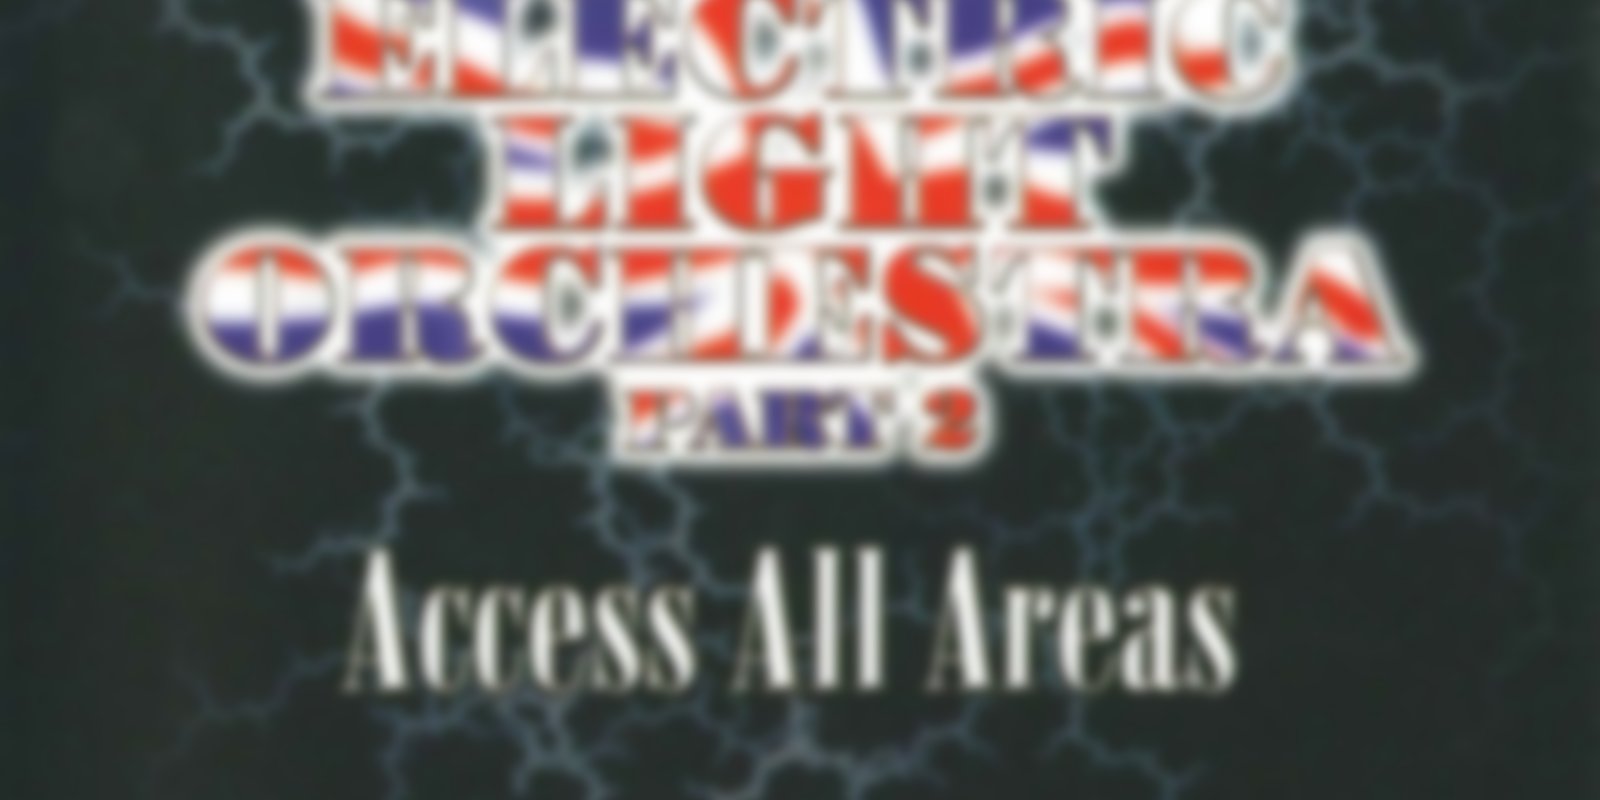 Electric Light Orchestra Part 2 - Access All Areas